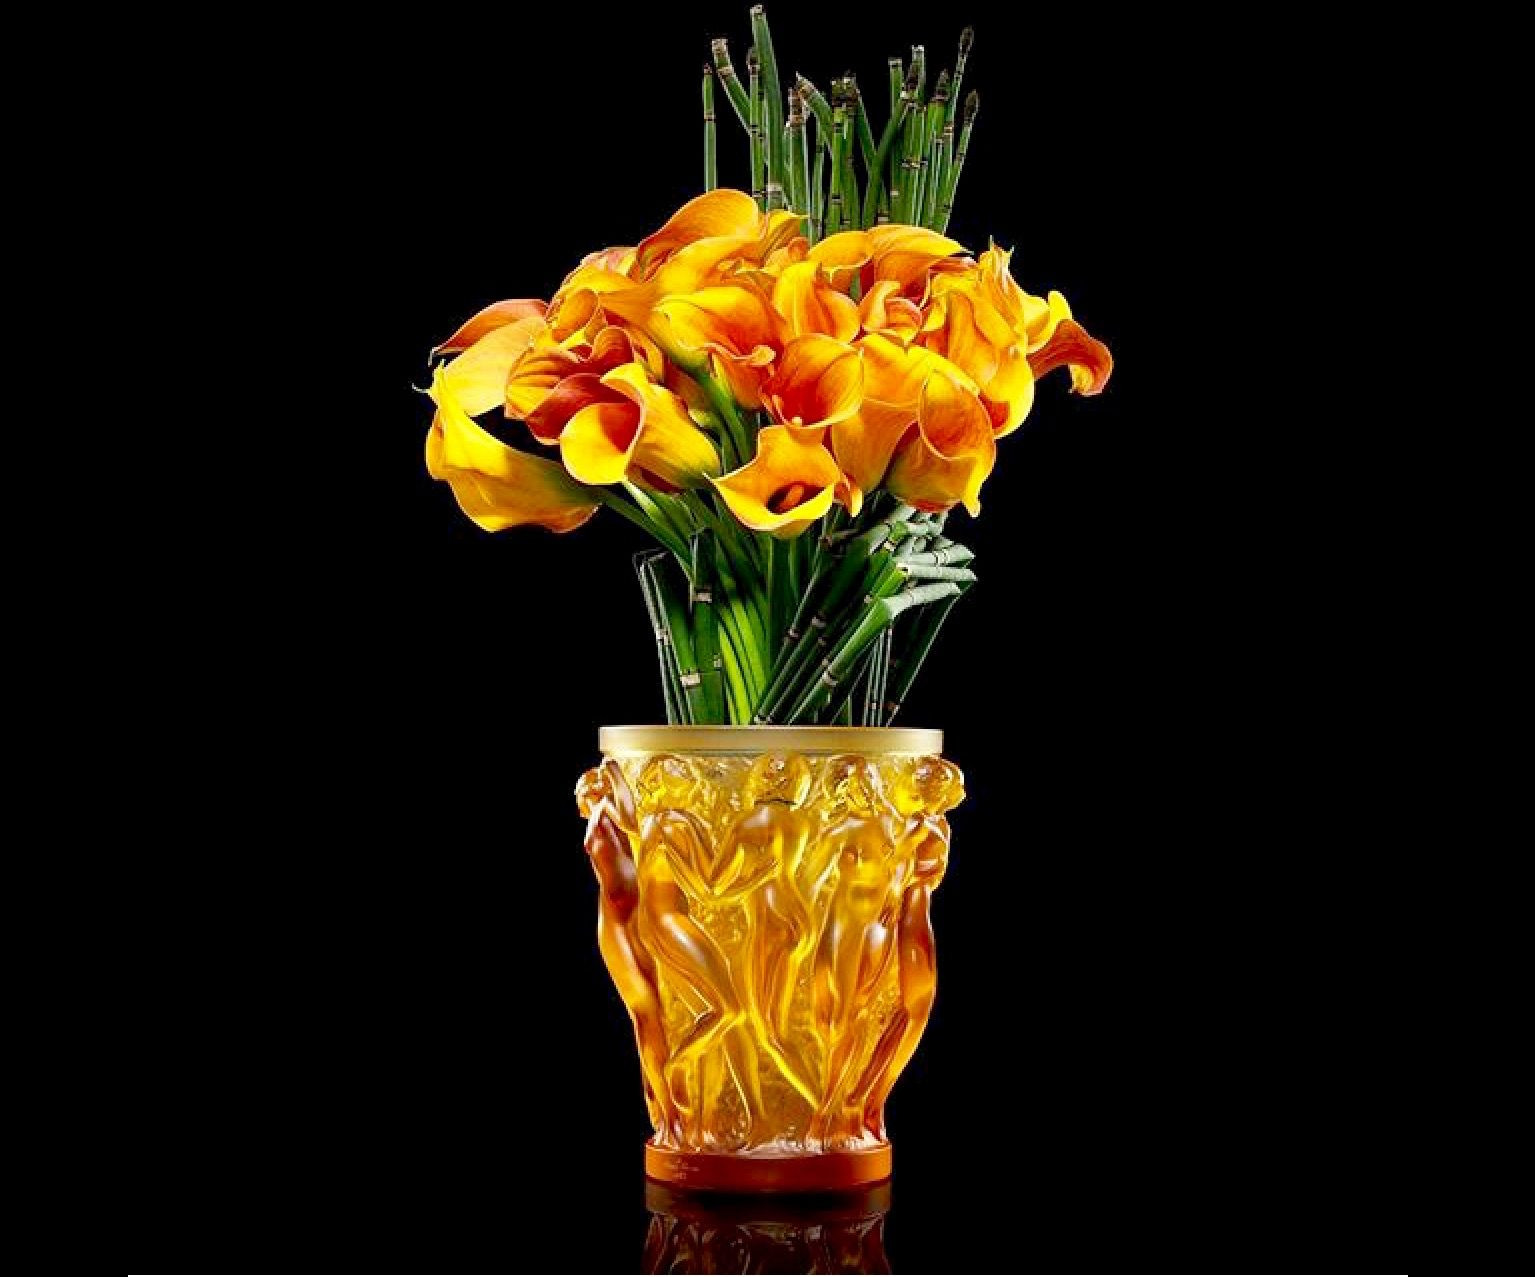 Twine Wrapped Vase Of Lalique Detalhes Pinterest Regarding Explore Crystal Vase Calla Lilies and More